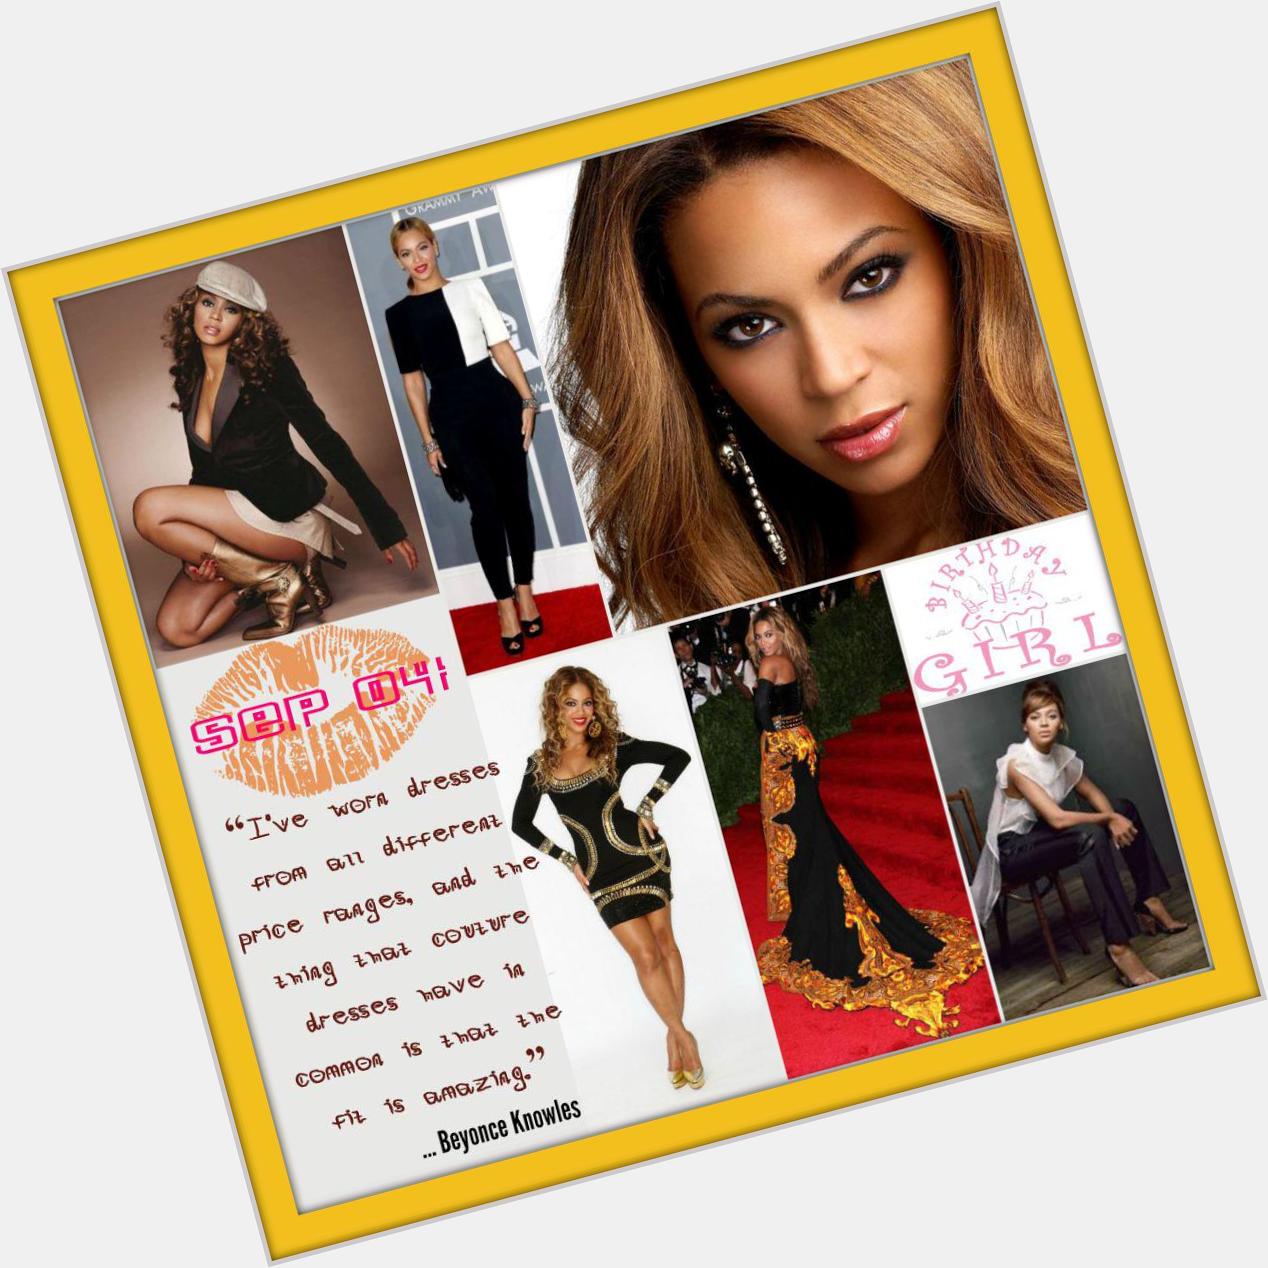 Happy Birthday Beyonce Knowles Sep 04 Event  